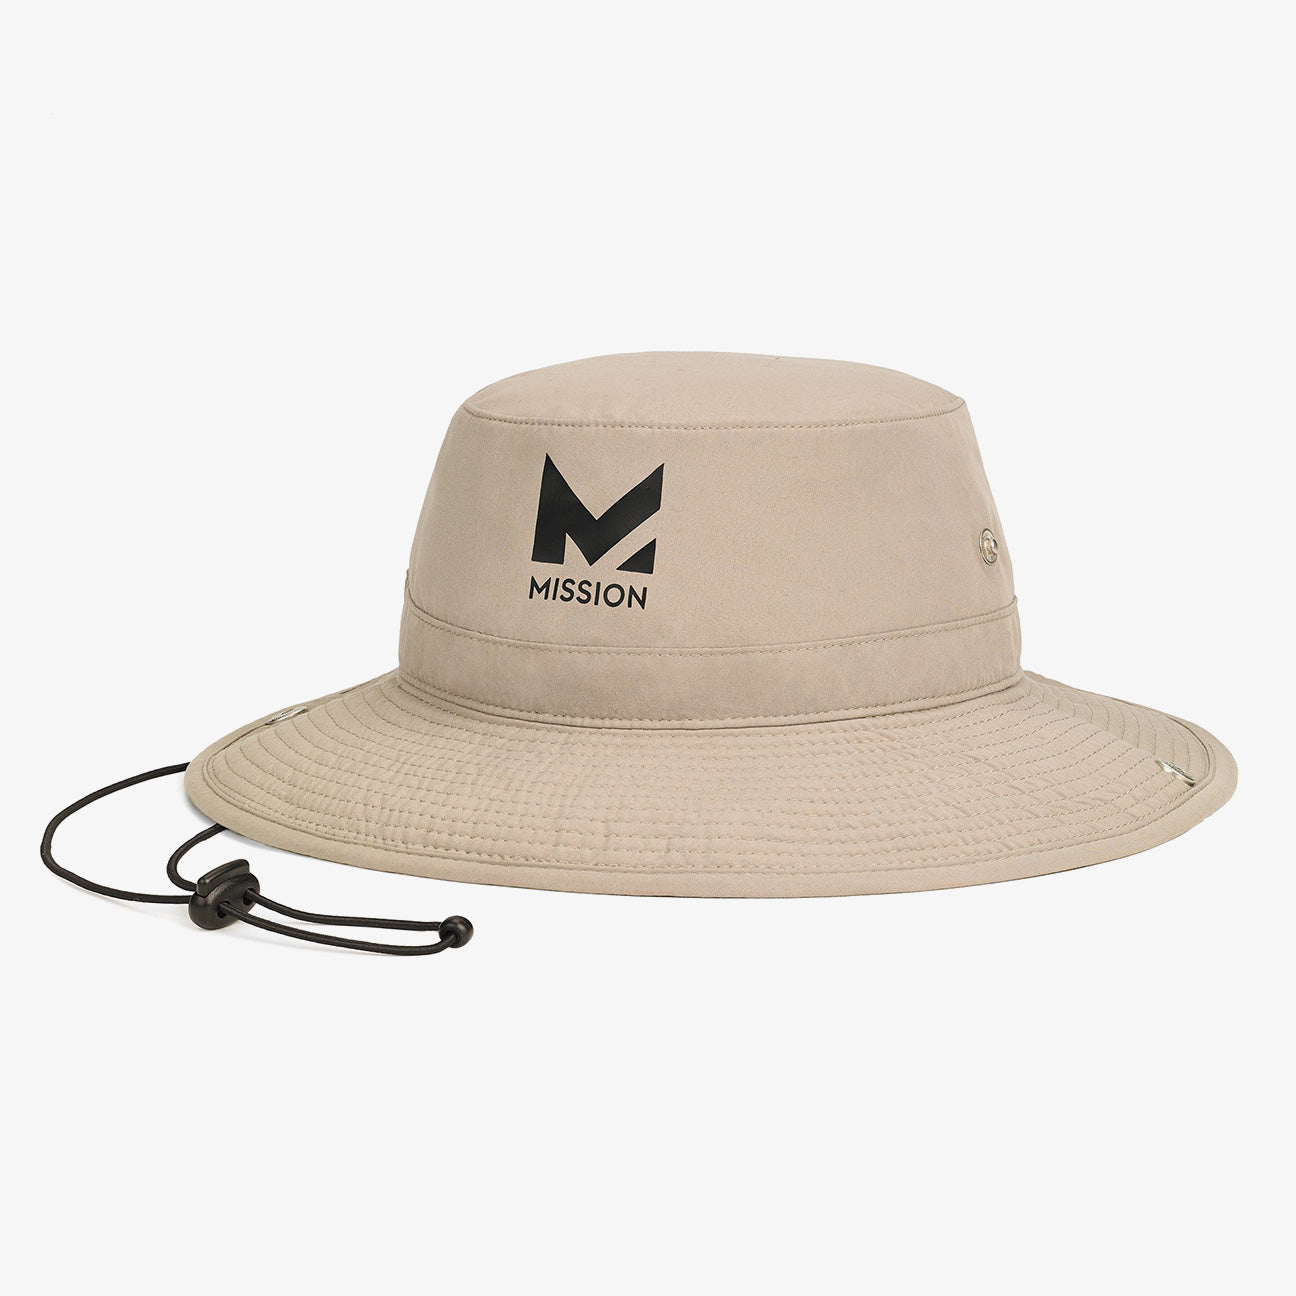 Cooling Bucket Hat Wide Brim Hats MISSION One Size Khaki 